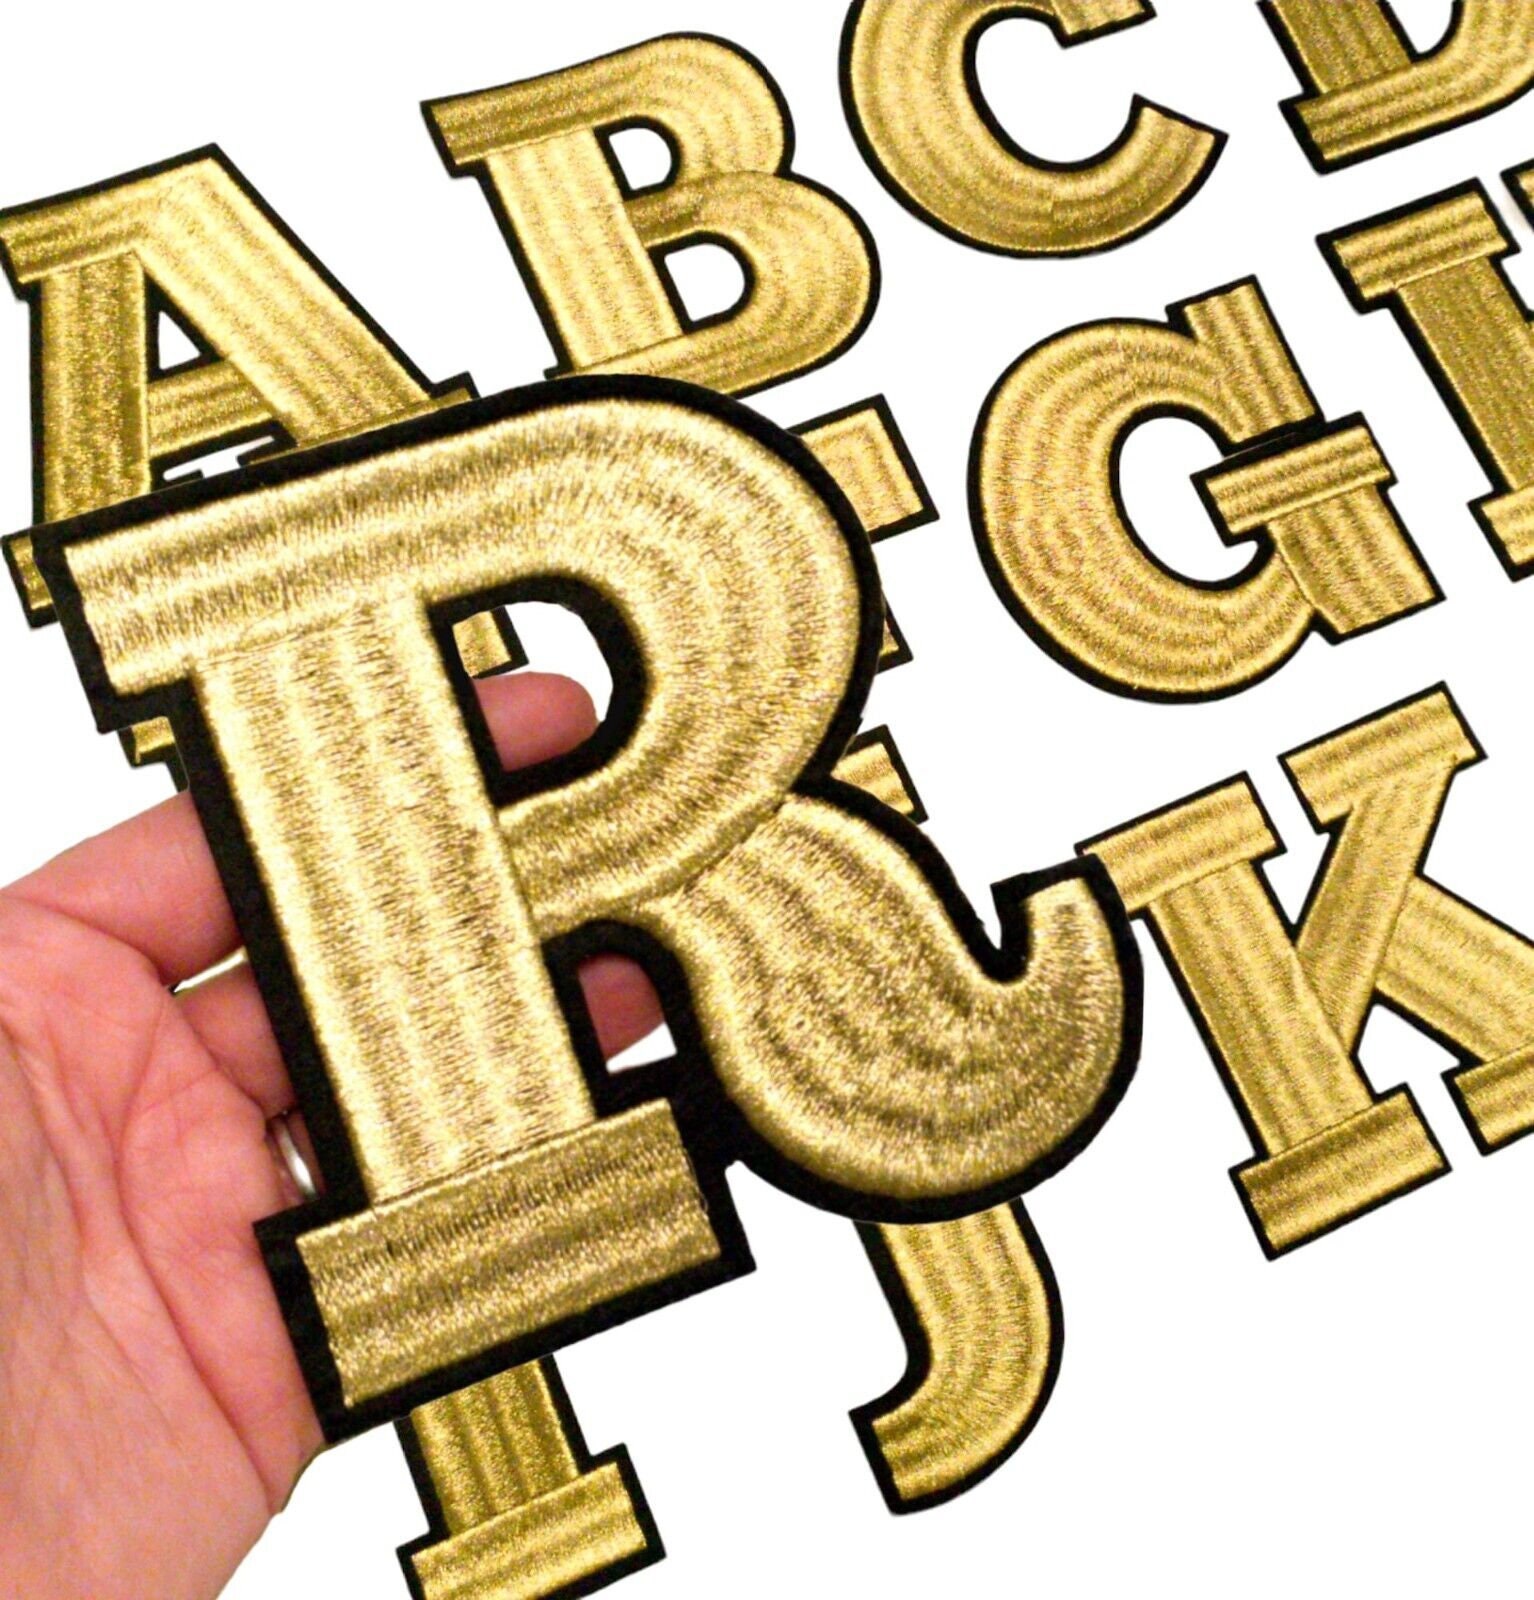 9-8005 Metallic Gold Letters - 1 inch Gold Alphabet Iron-on